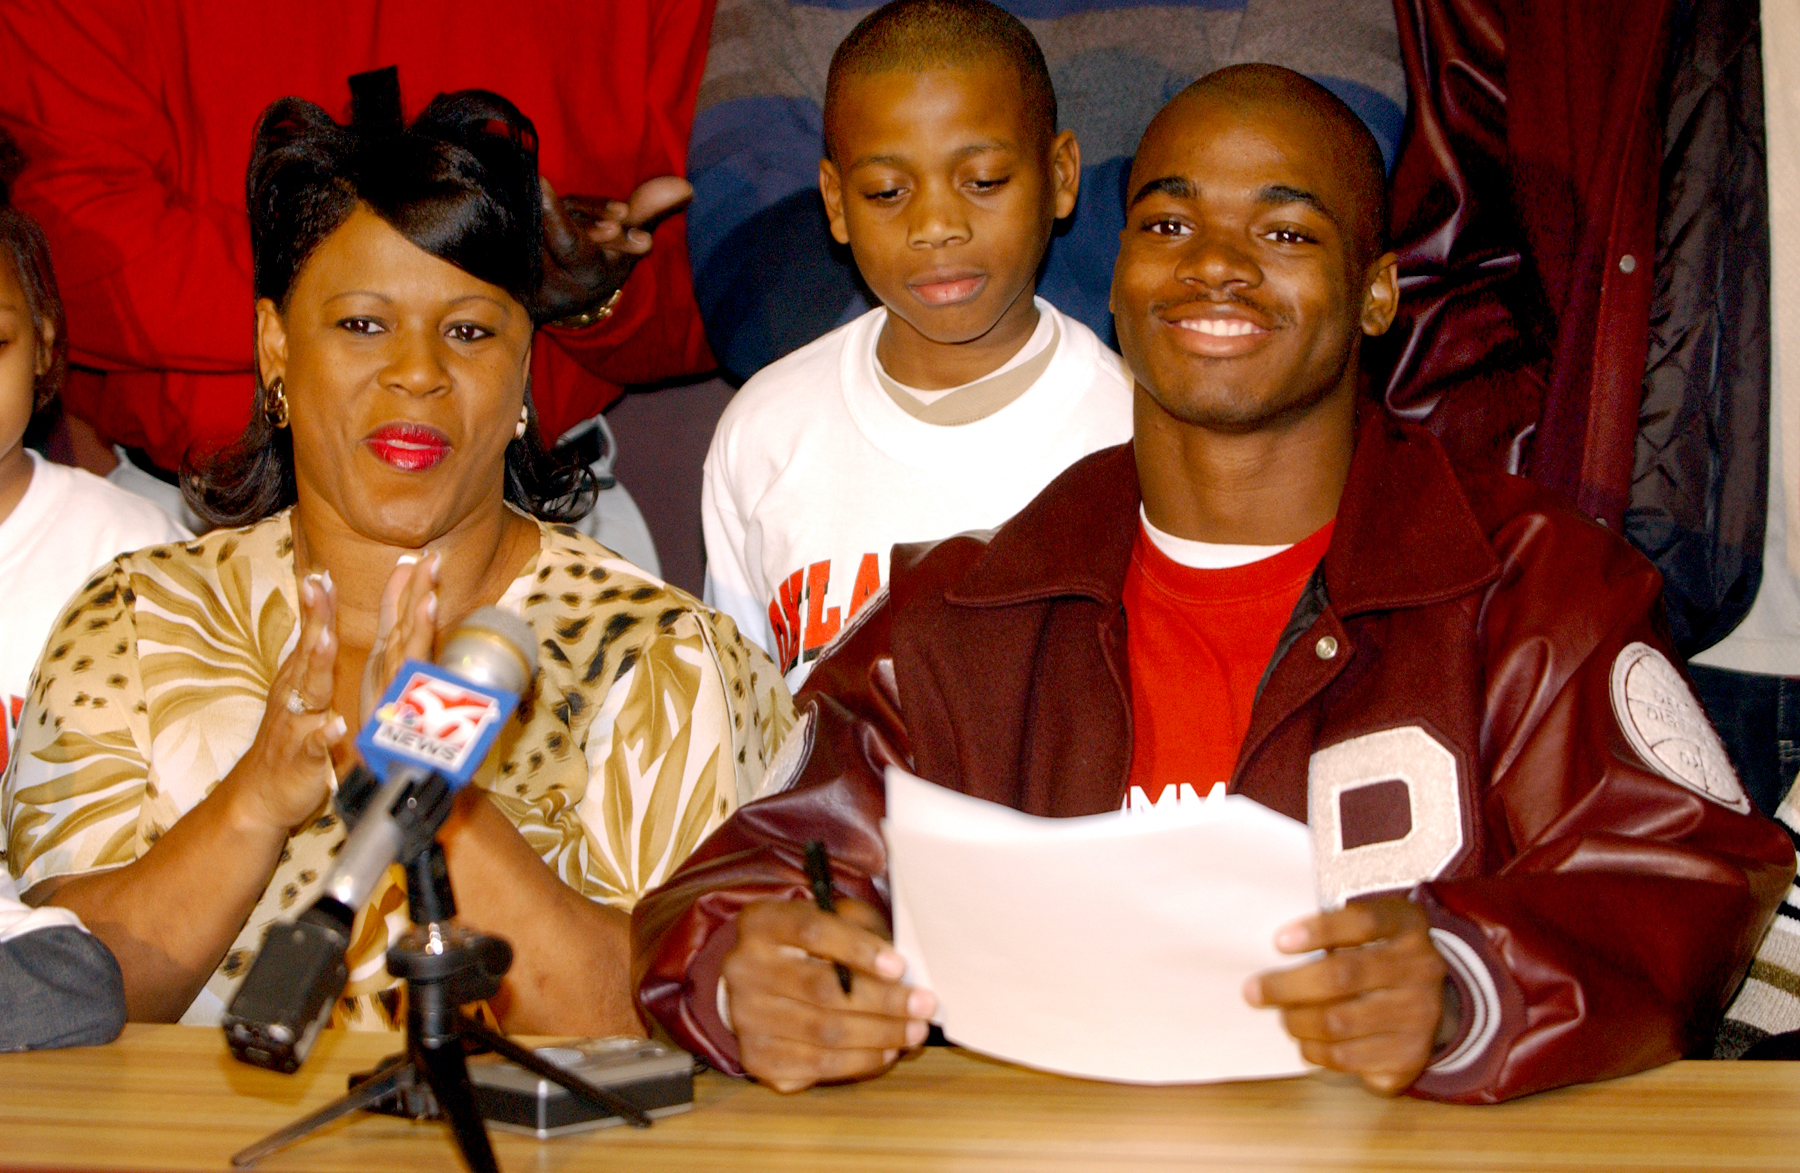 Palestine running back Adrian Peterson, right, smiles after signing a national letter of intent to play football for Oklahoma on Feb. 4, 2004, in Palestine, Texas. At left is his mother Bonita Jackson, and at center is his brother, Jaylon Jackson.